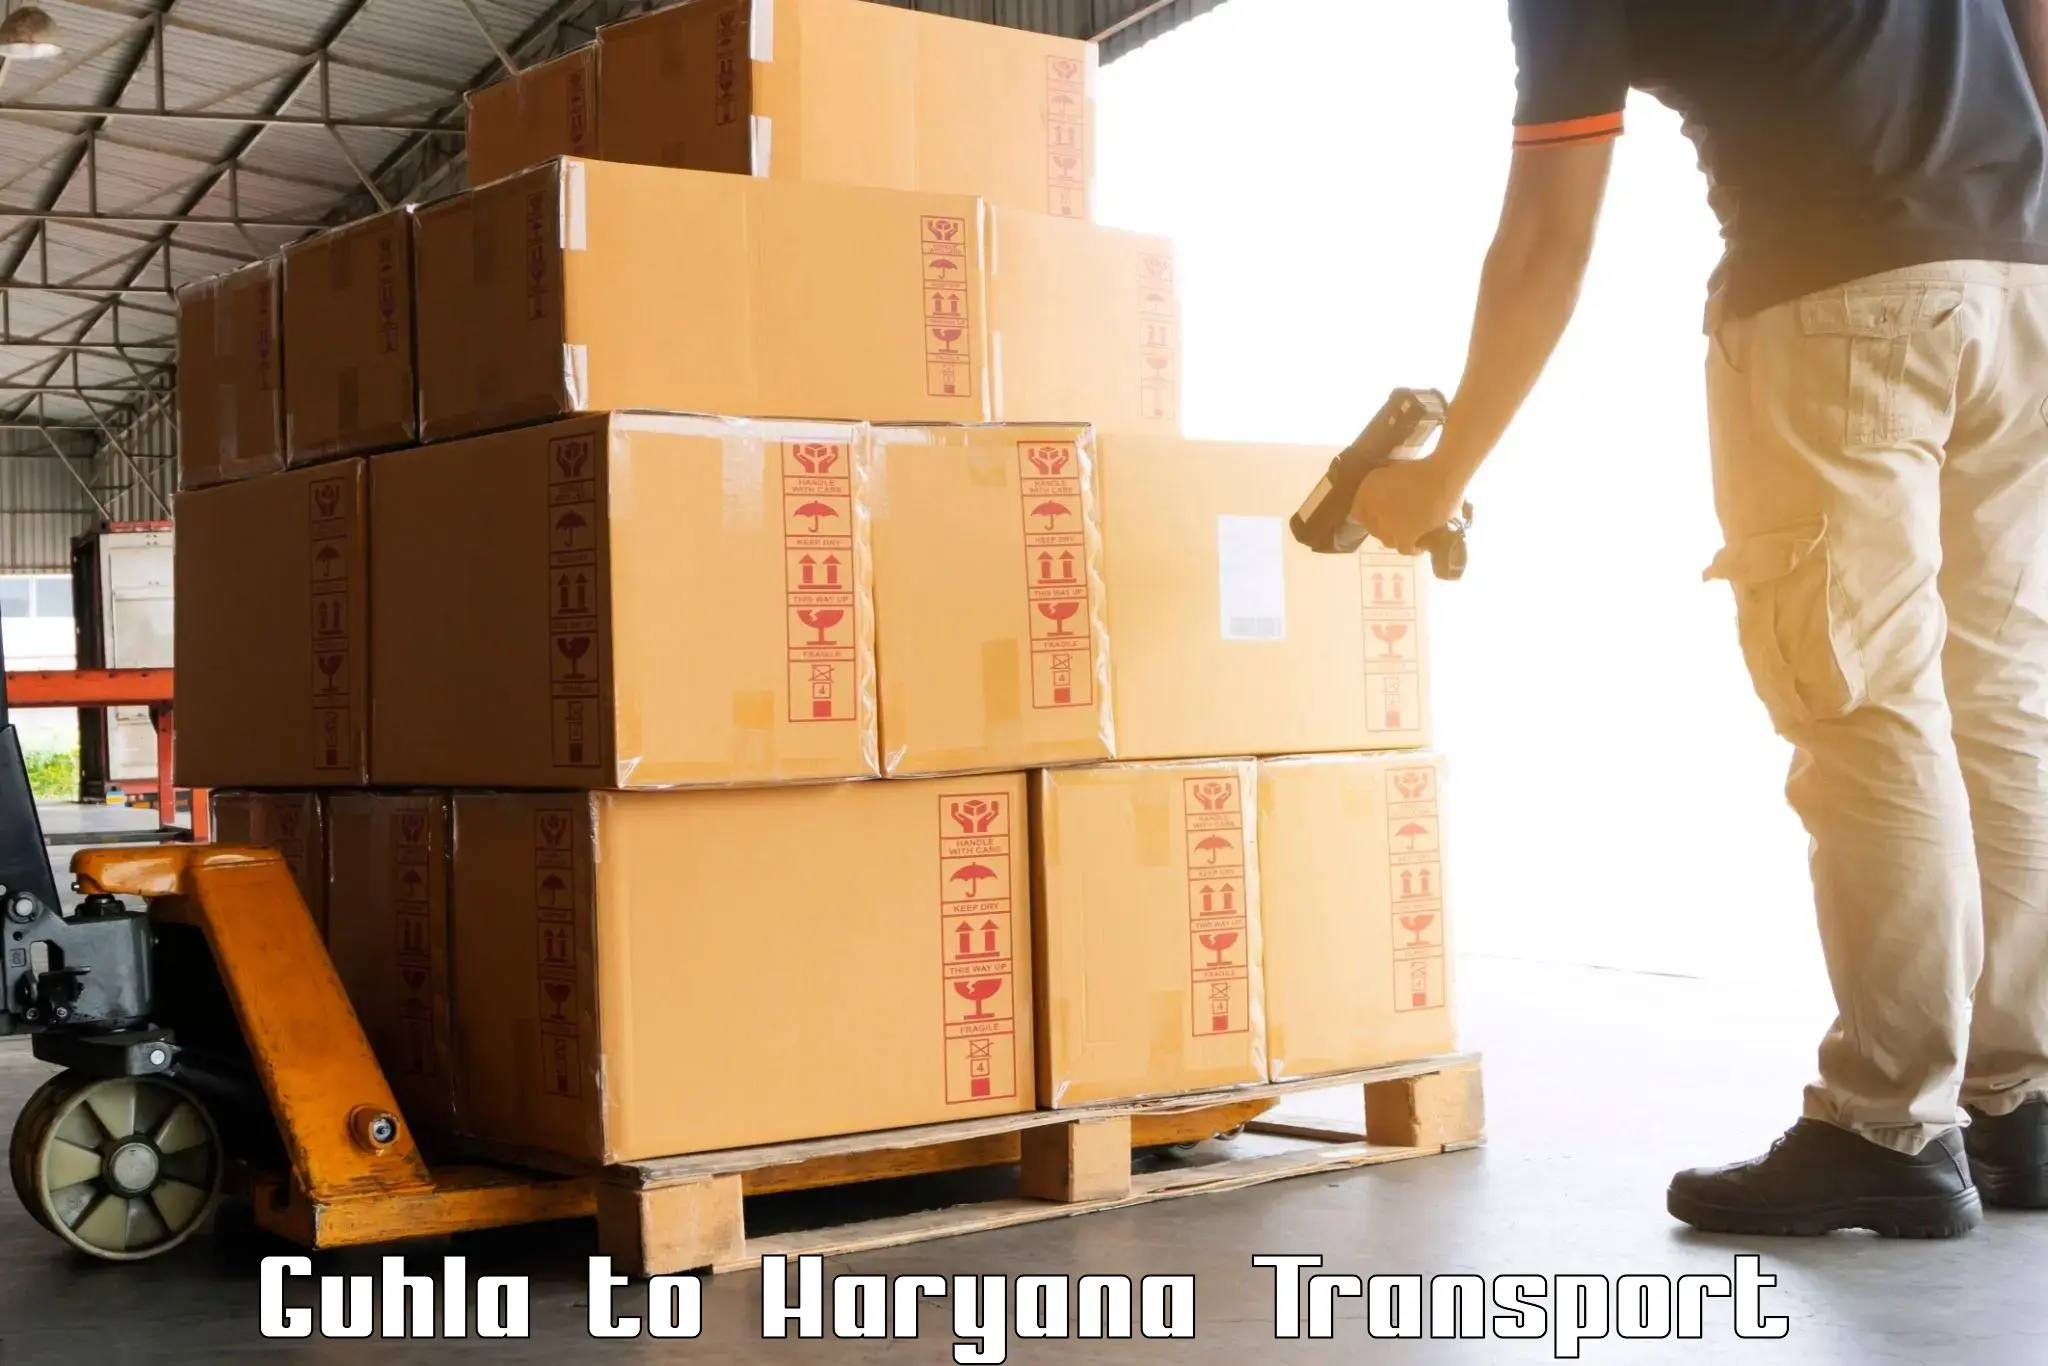 Transport shared services Guhla to Sonipat